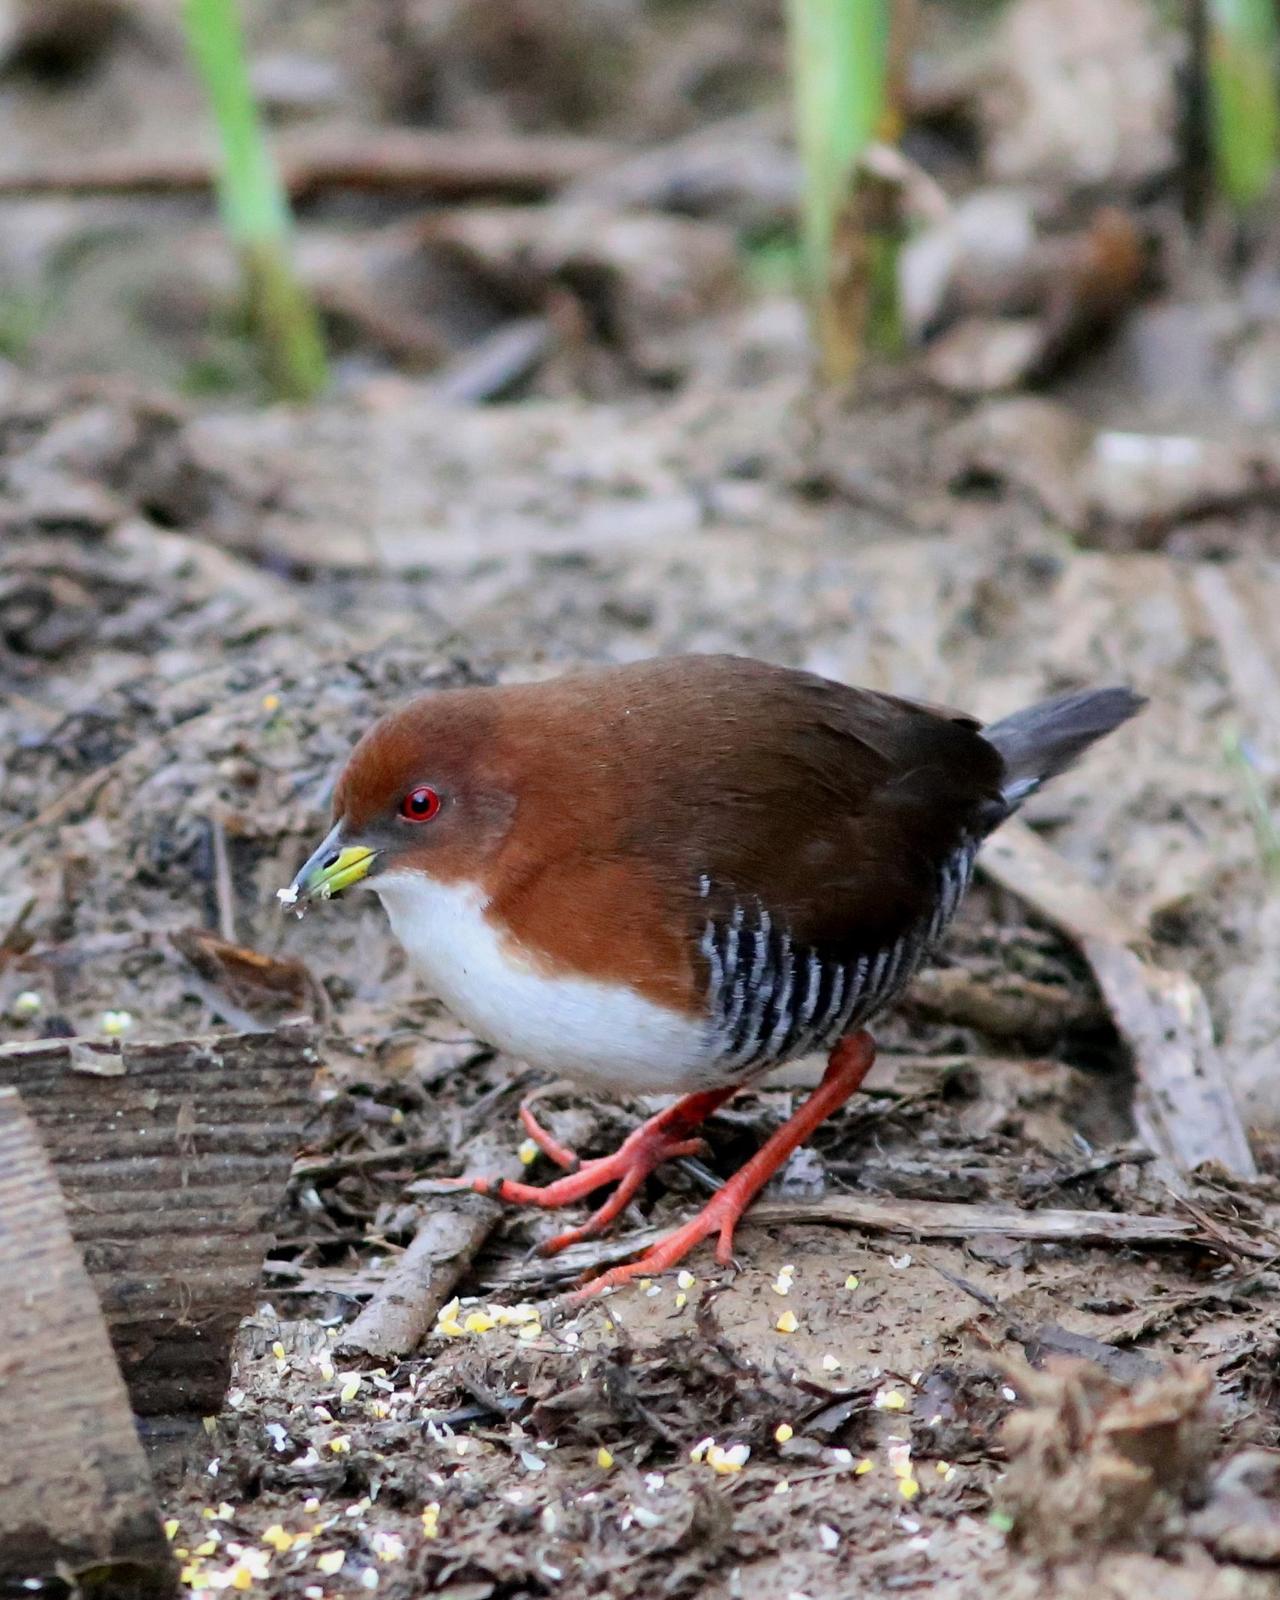 Red-and-white Crake Photo by Rohan van Twest